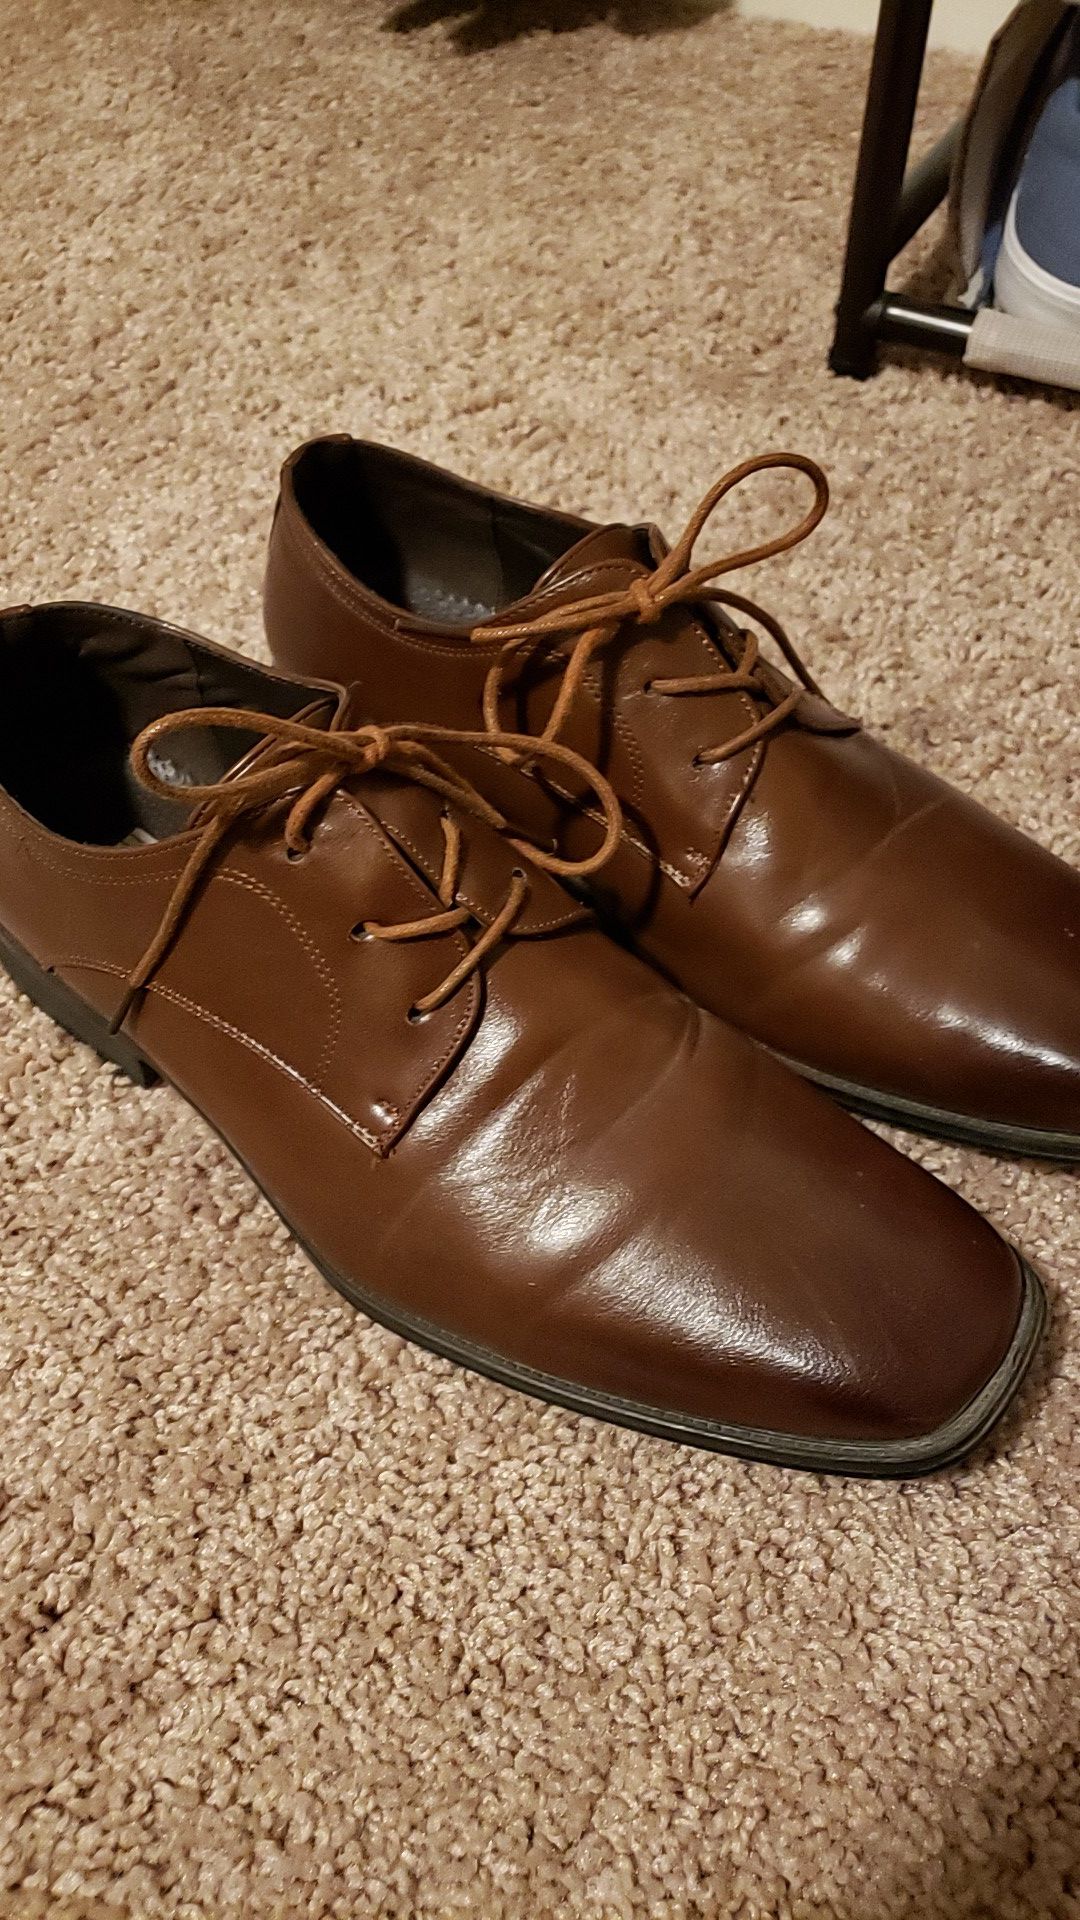 Brown dress shoes size 11